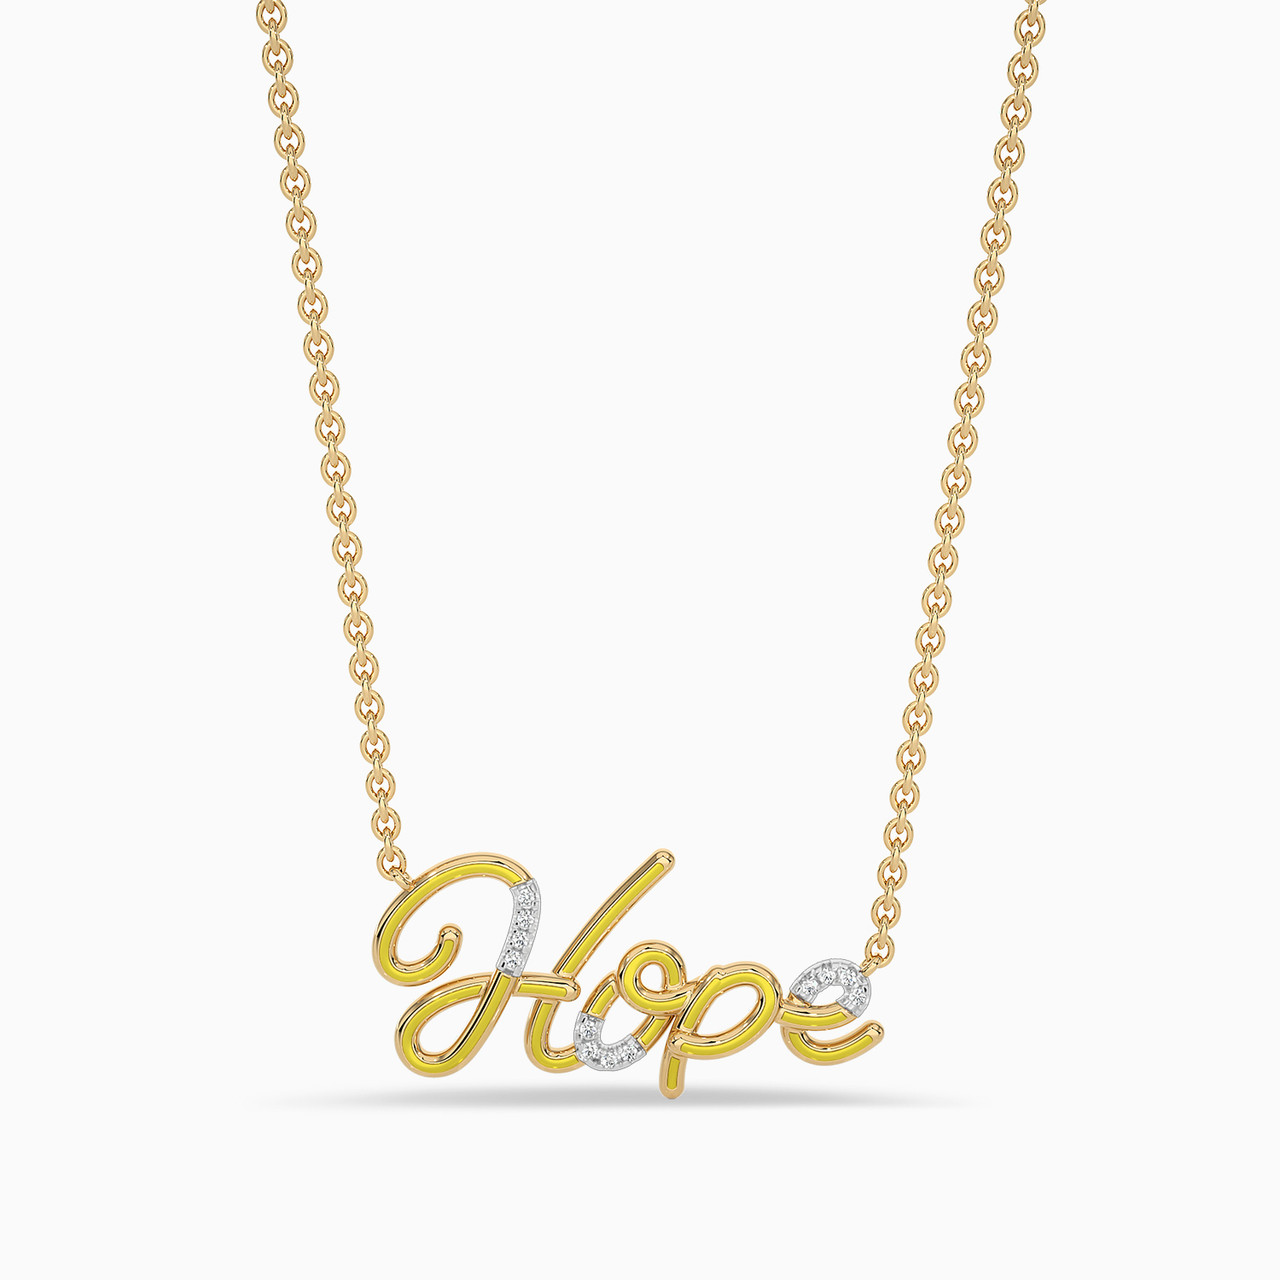 Hope Enamel Coated & Colored Stone Pendant with 18K Gold Chain